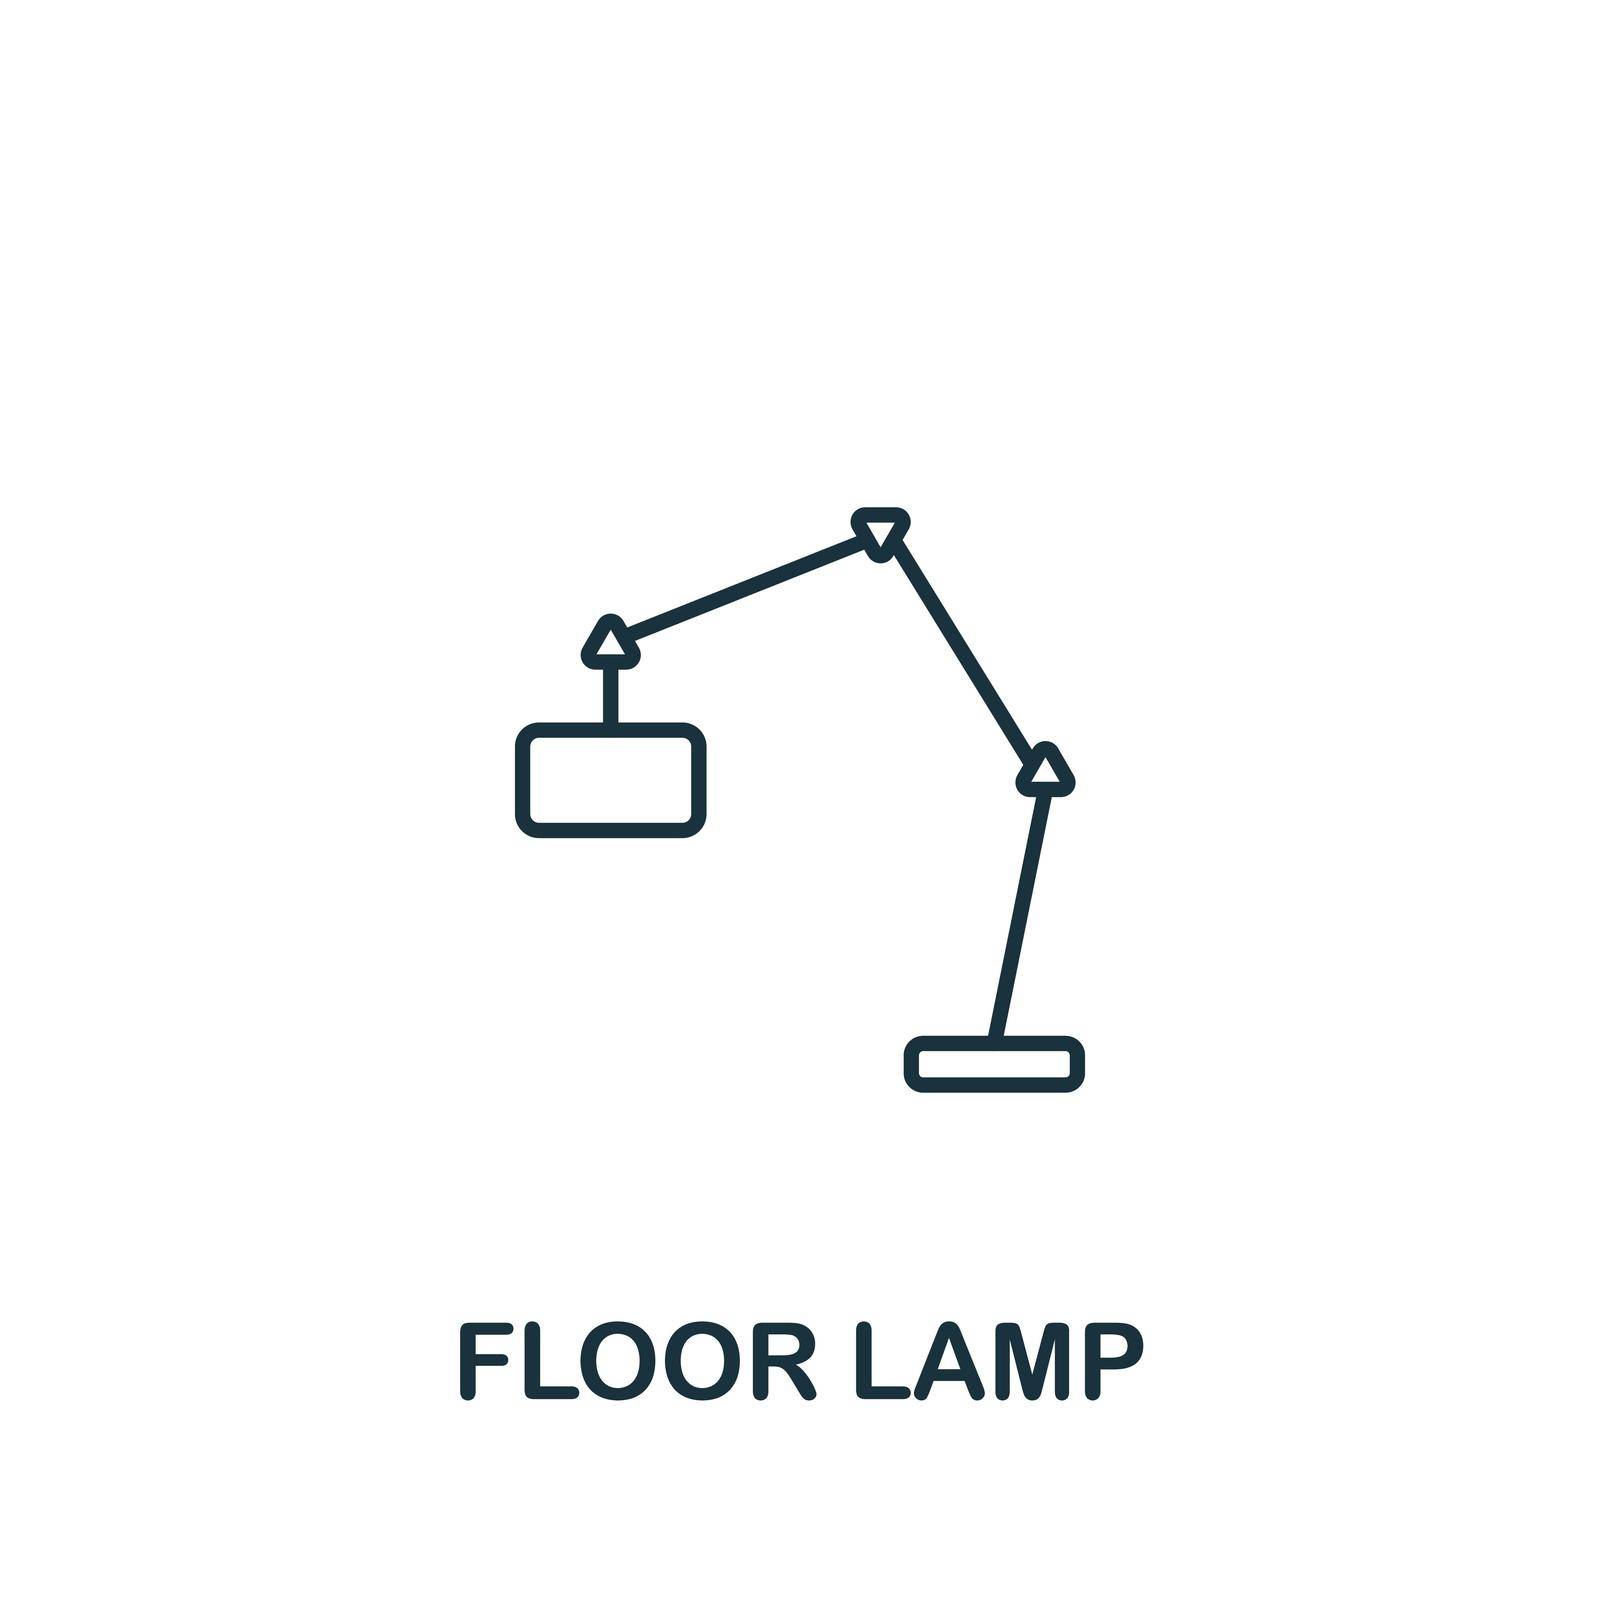 Floor Lamp icon. Simple line element interior furniture symbol for templates, web design and infographics.